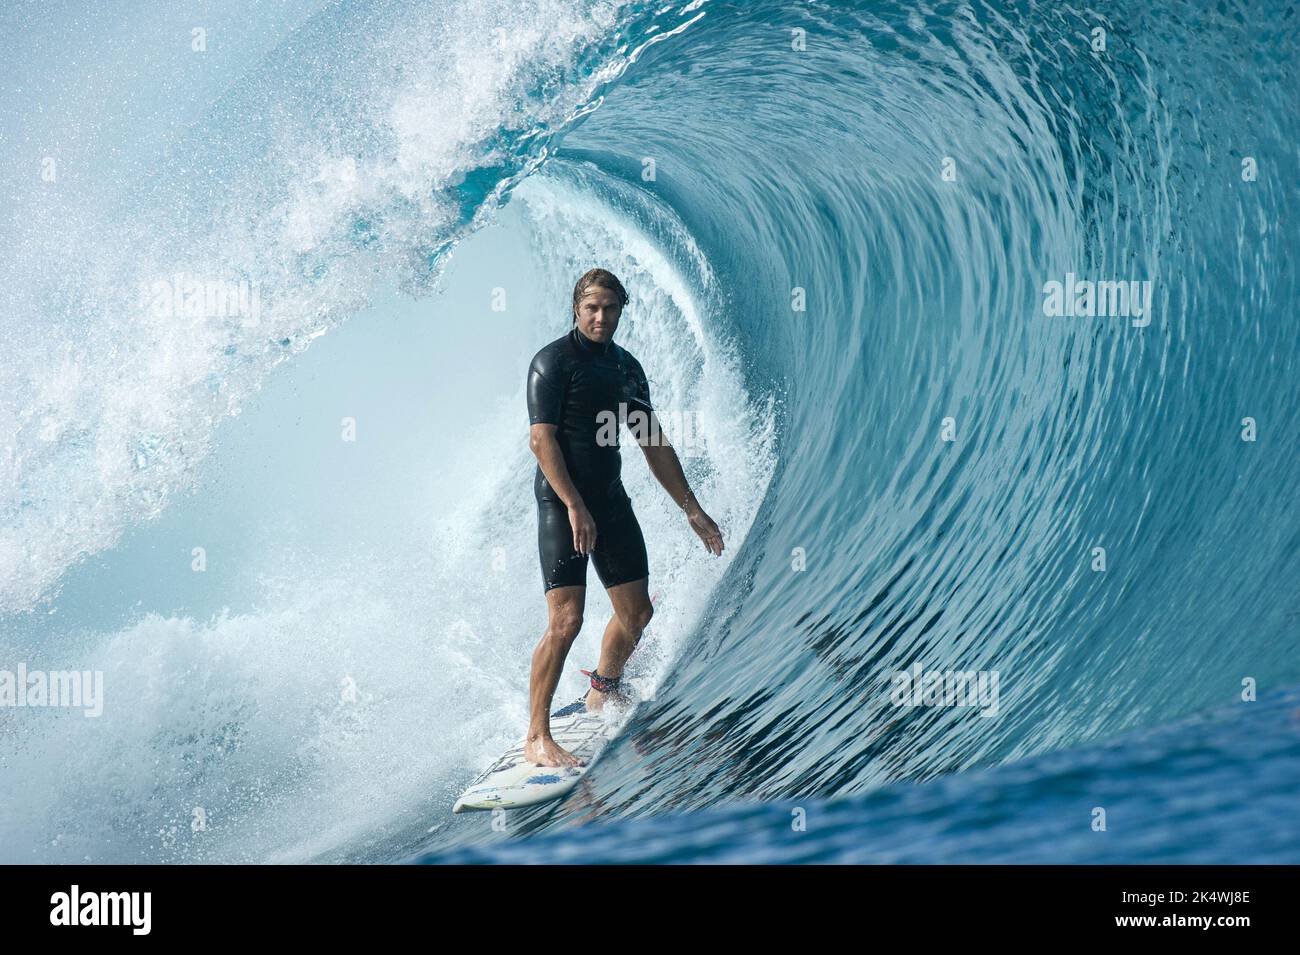 SURFING Australian surfer Anthony Walsh surf at Teahupoo during a big swell on September 11, 2014 at Teahupoo in Tahiti, French Polynesia - Photo: Julien Girardot/DPPI/LiveMedia Stock Photo